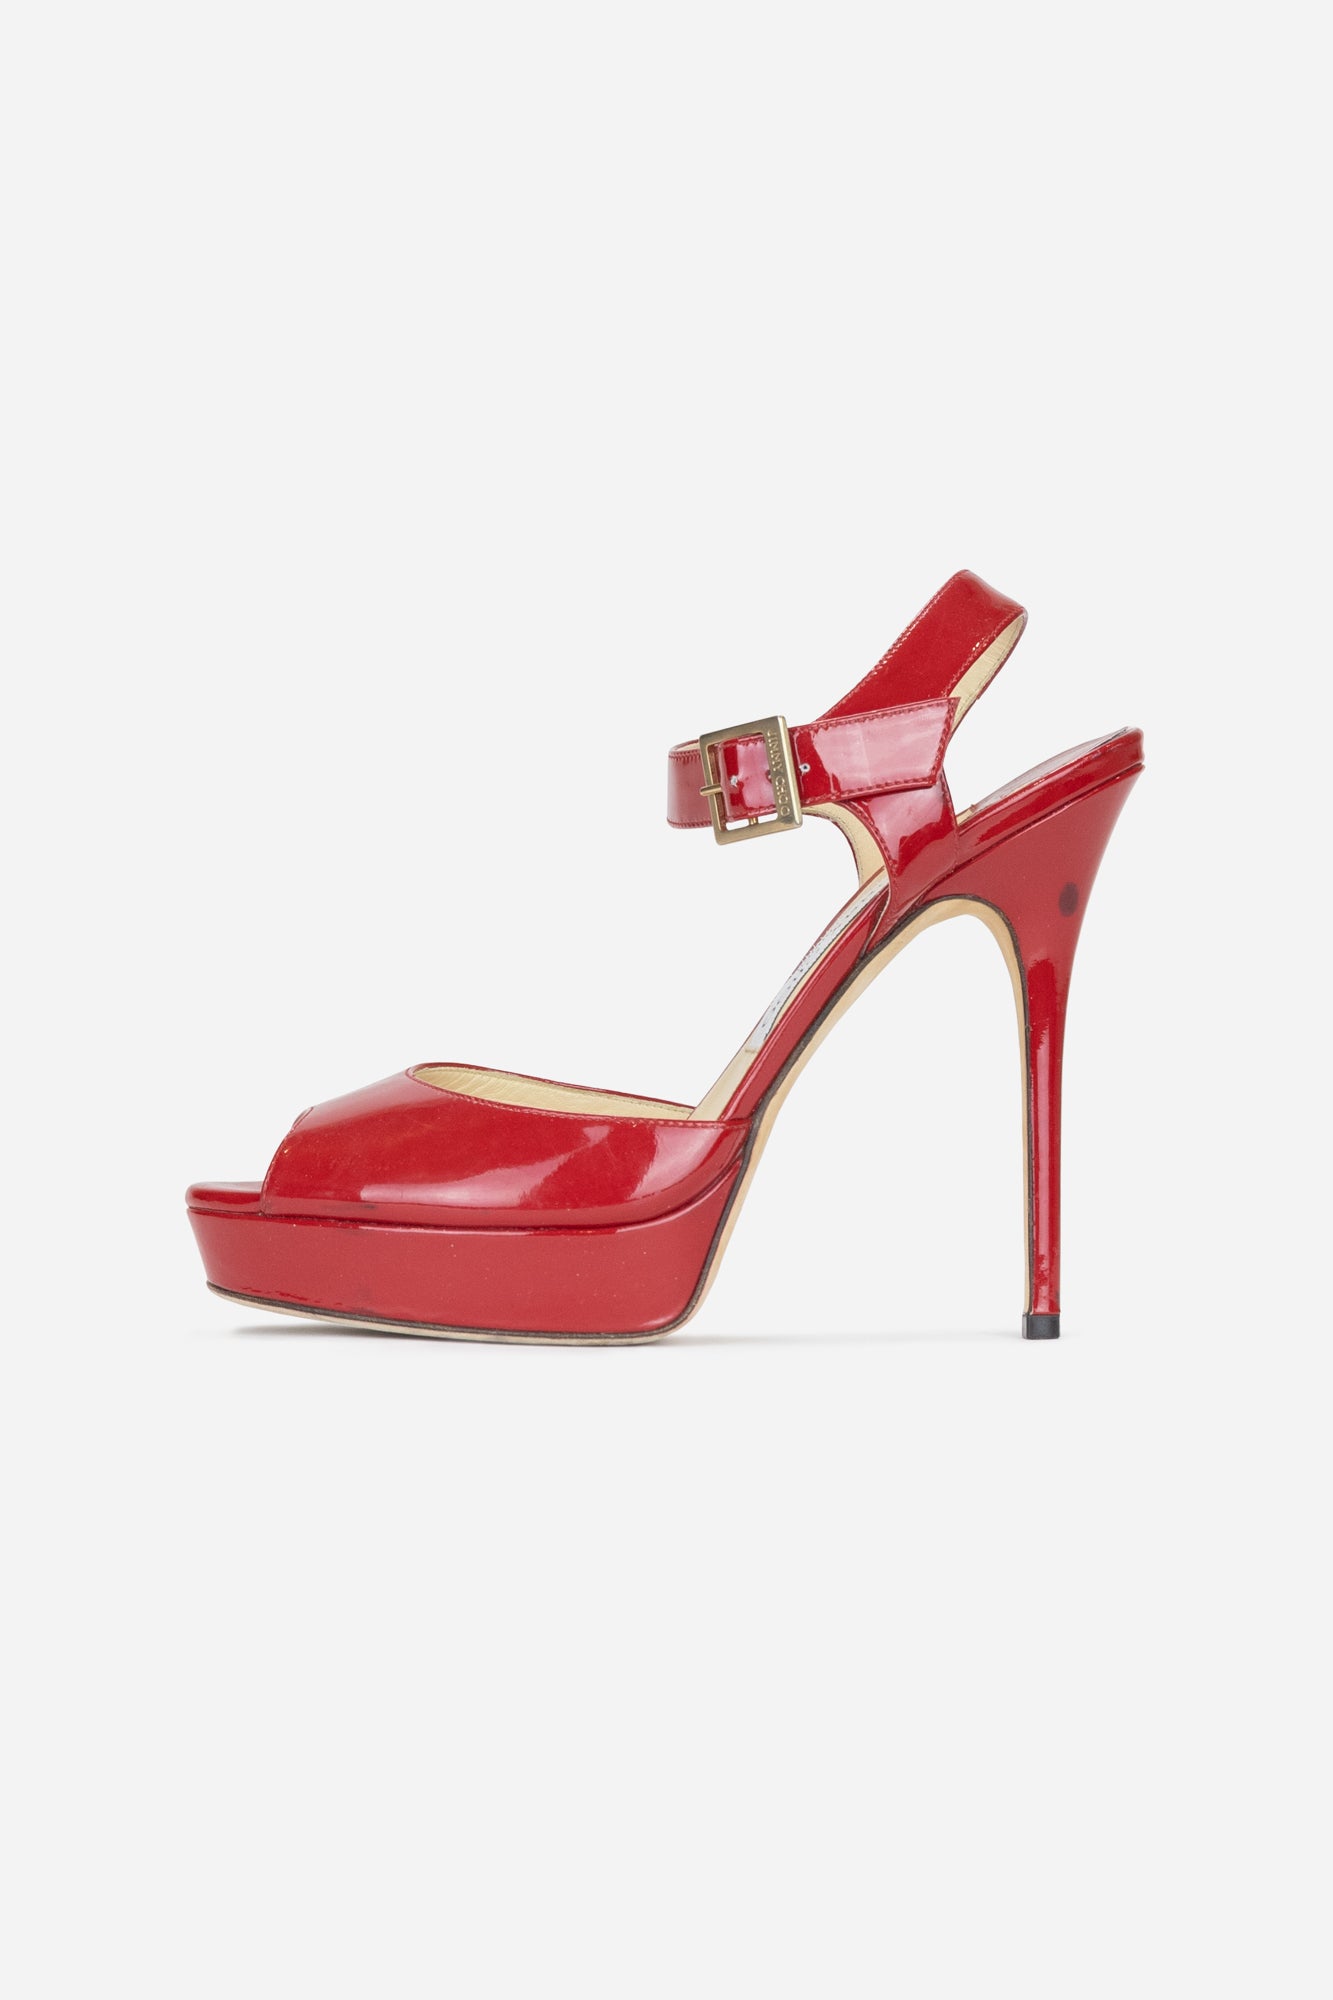 Red Patent Leather Platform Sandals - So Over It Luxury Consignment